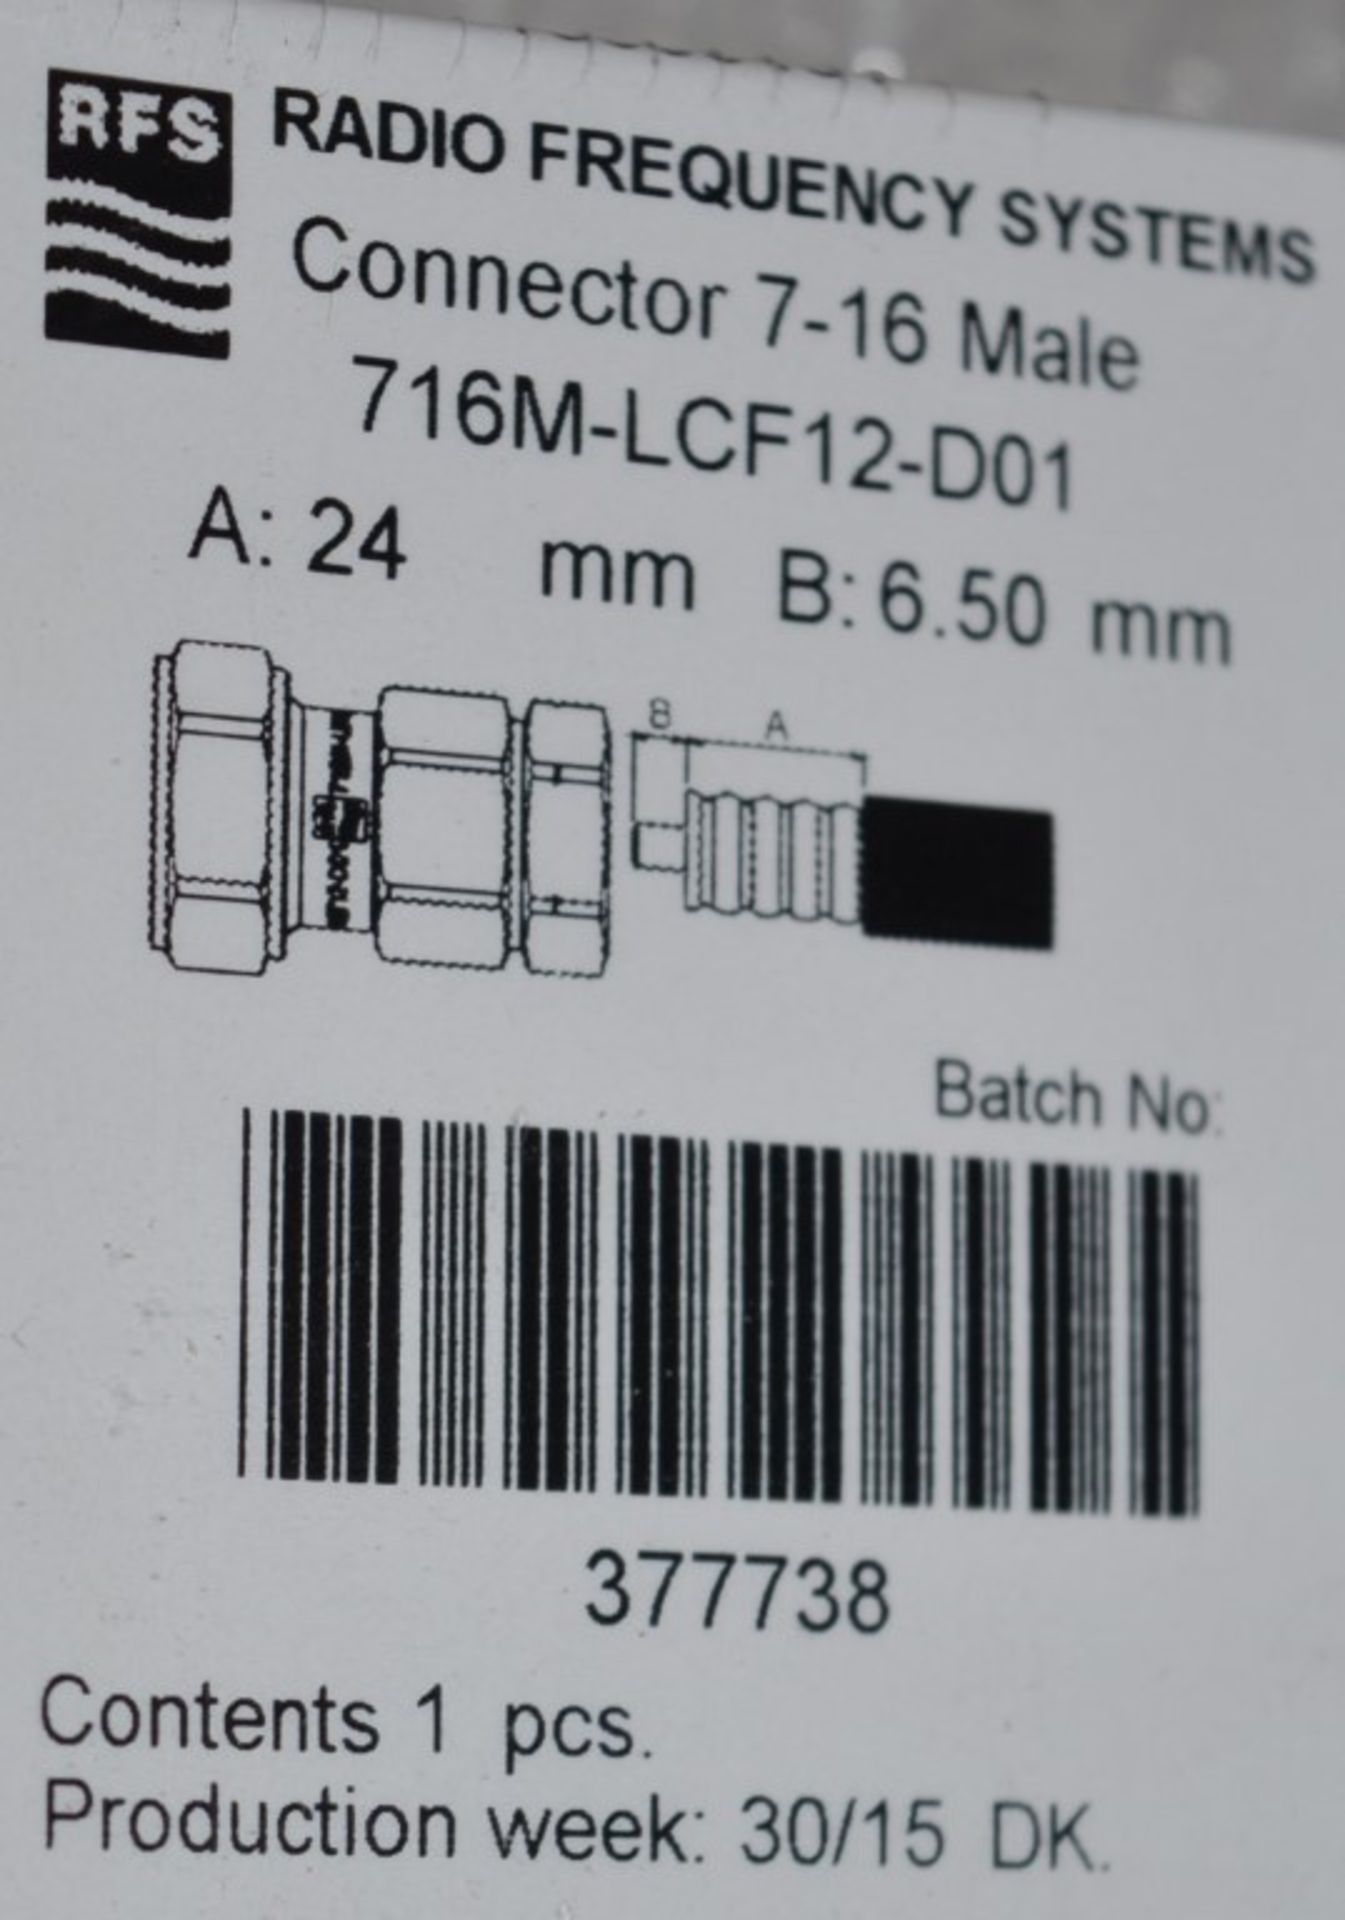 15 x Radio Frequency Systems 7-16 Male Connectors for Coaxial Cable - Type 716M-LCF78-D01 - Brand - Image 2 of 5